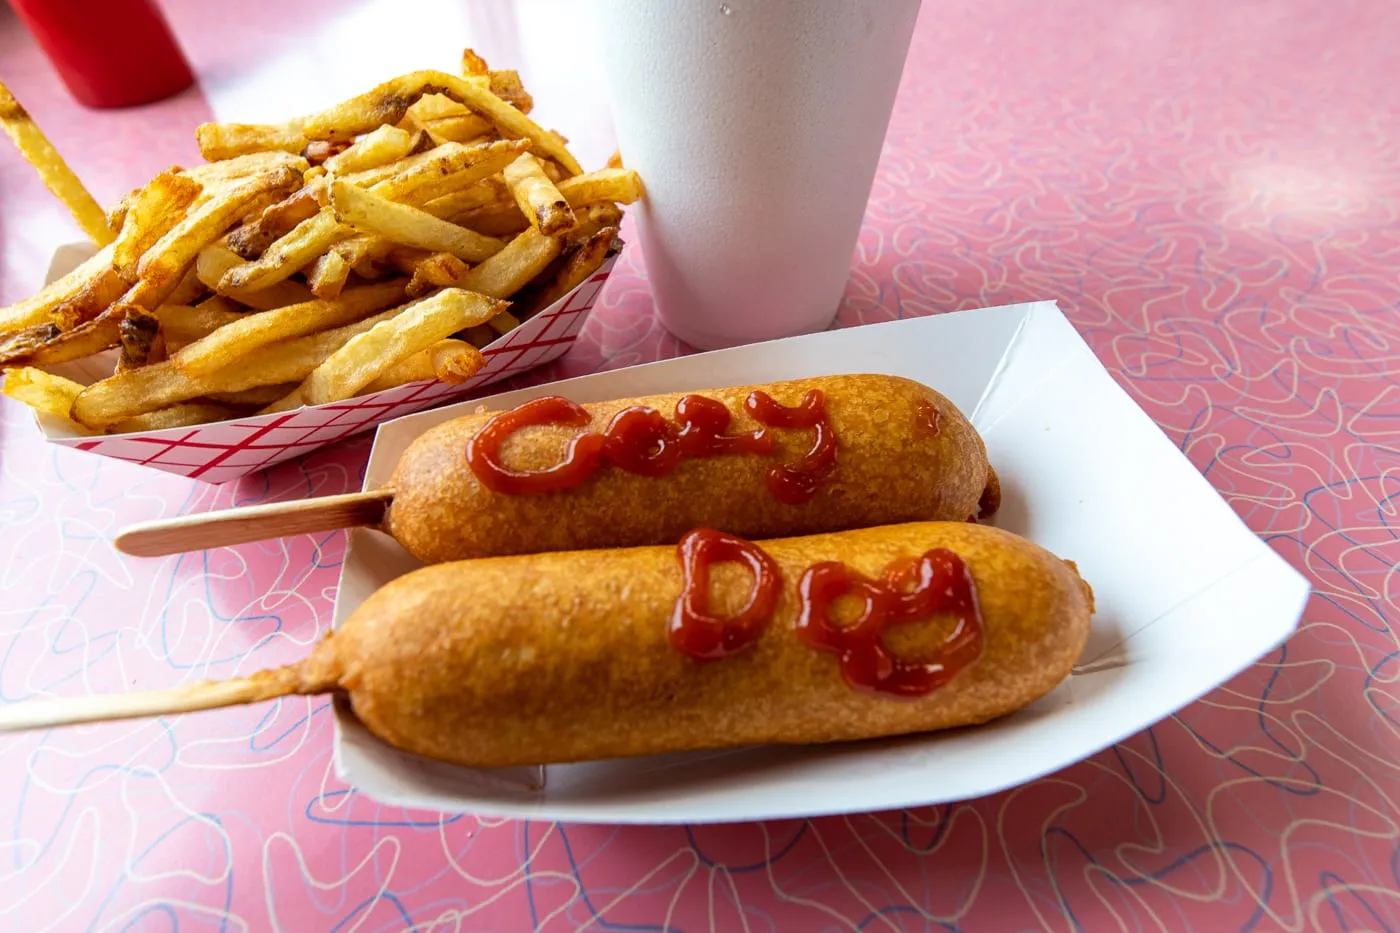 Corn dog and fries at Cozy Dog Drive In in Springfield, Illinois on Route 66